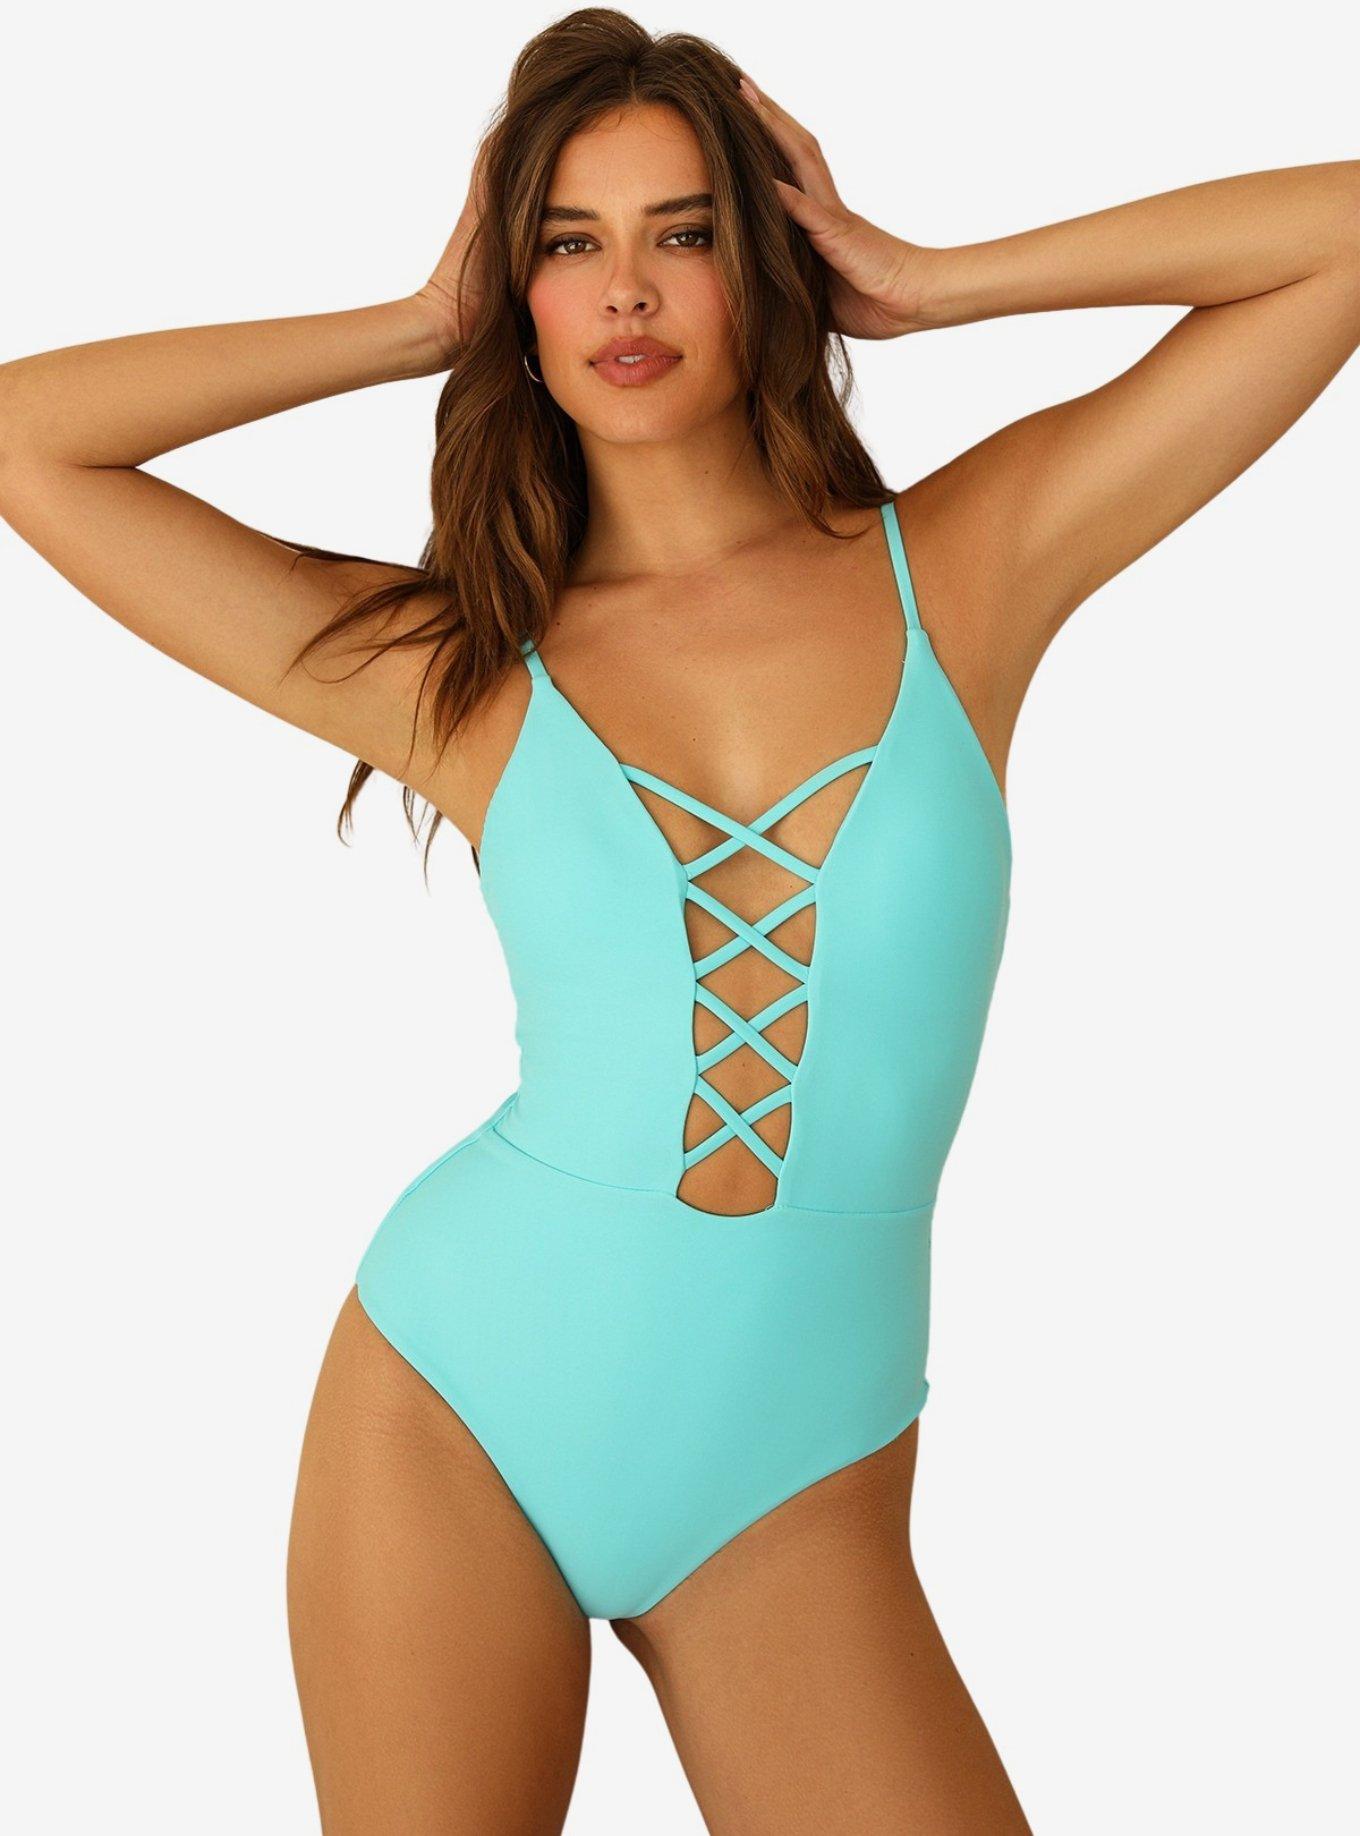 Dippin' Daisy's Bliss One Piece Blue Crush